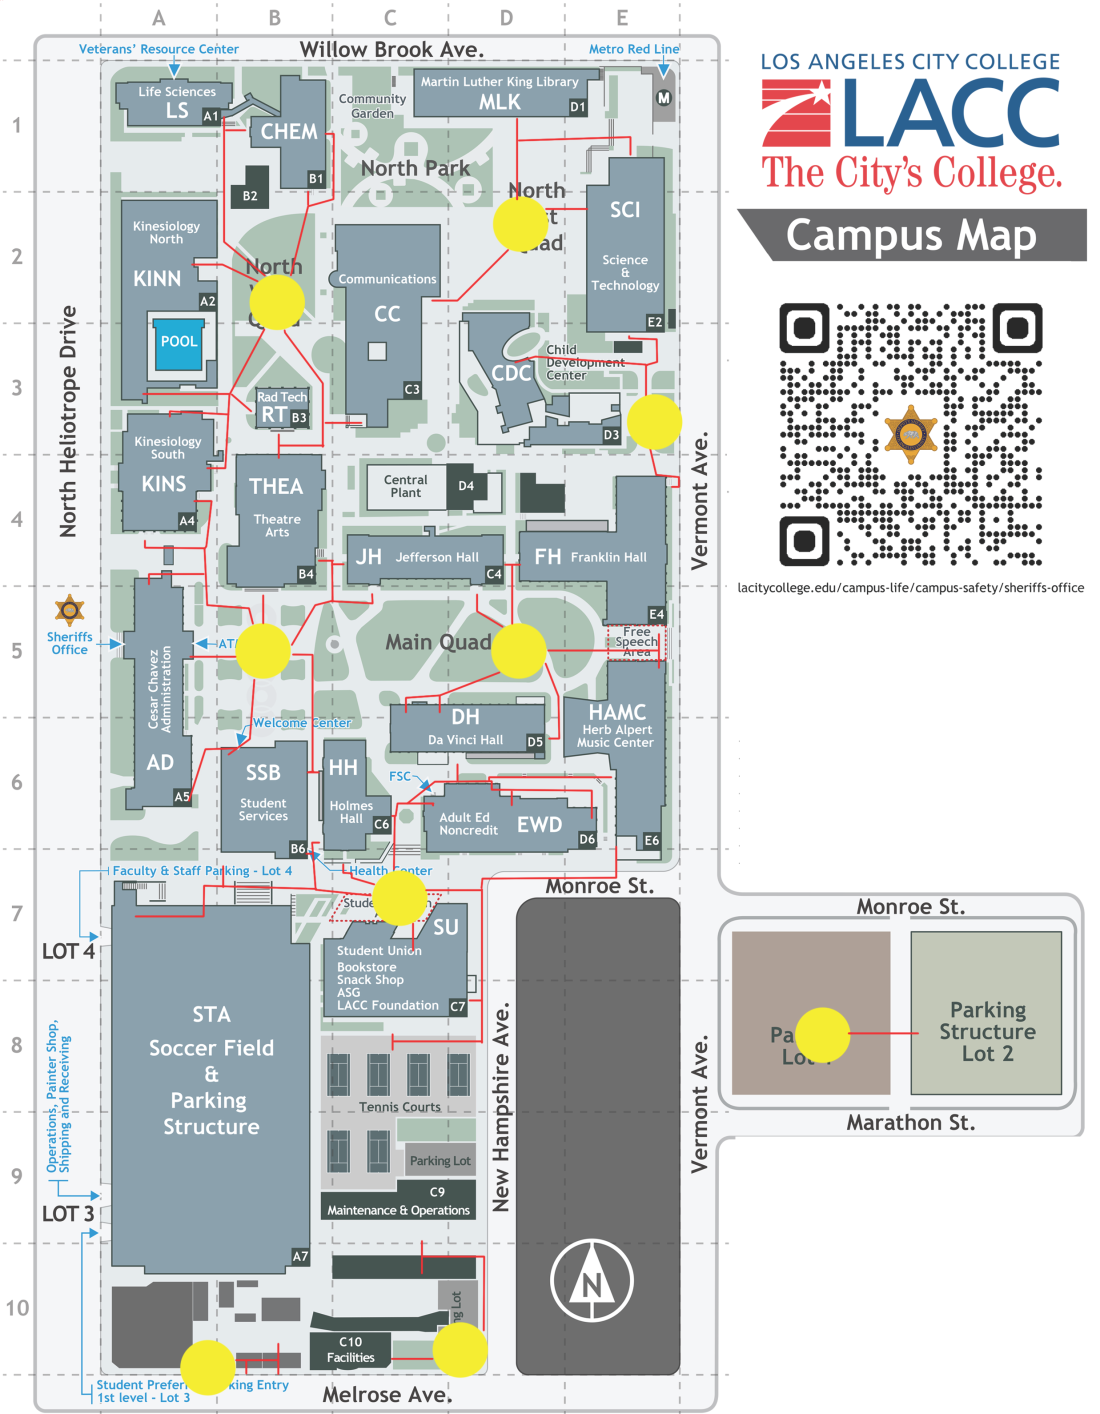 LACC Campus evacuation map showing assembly areas and evacuation routes from buildings. Revised 2023